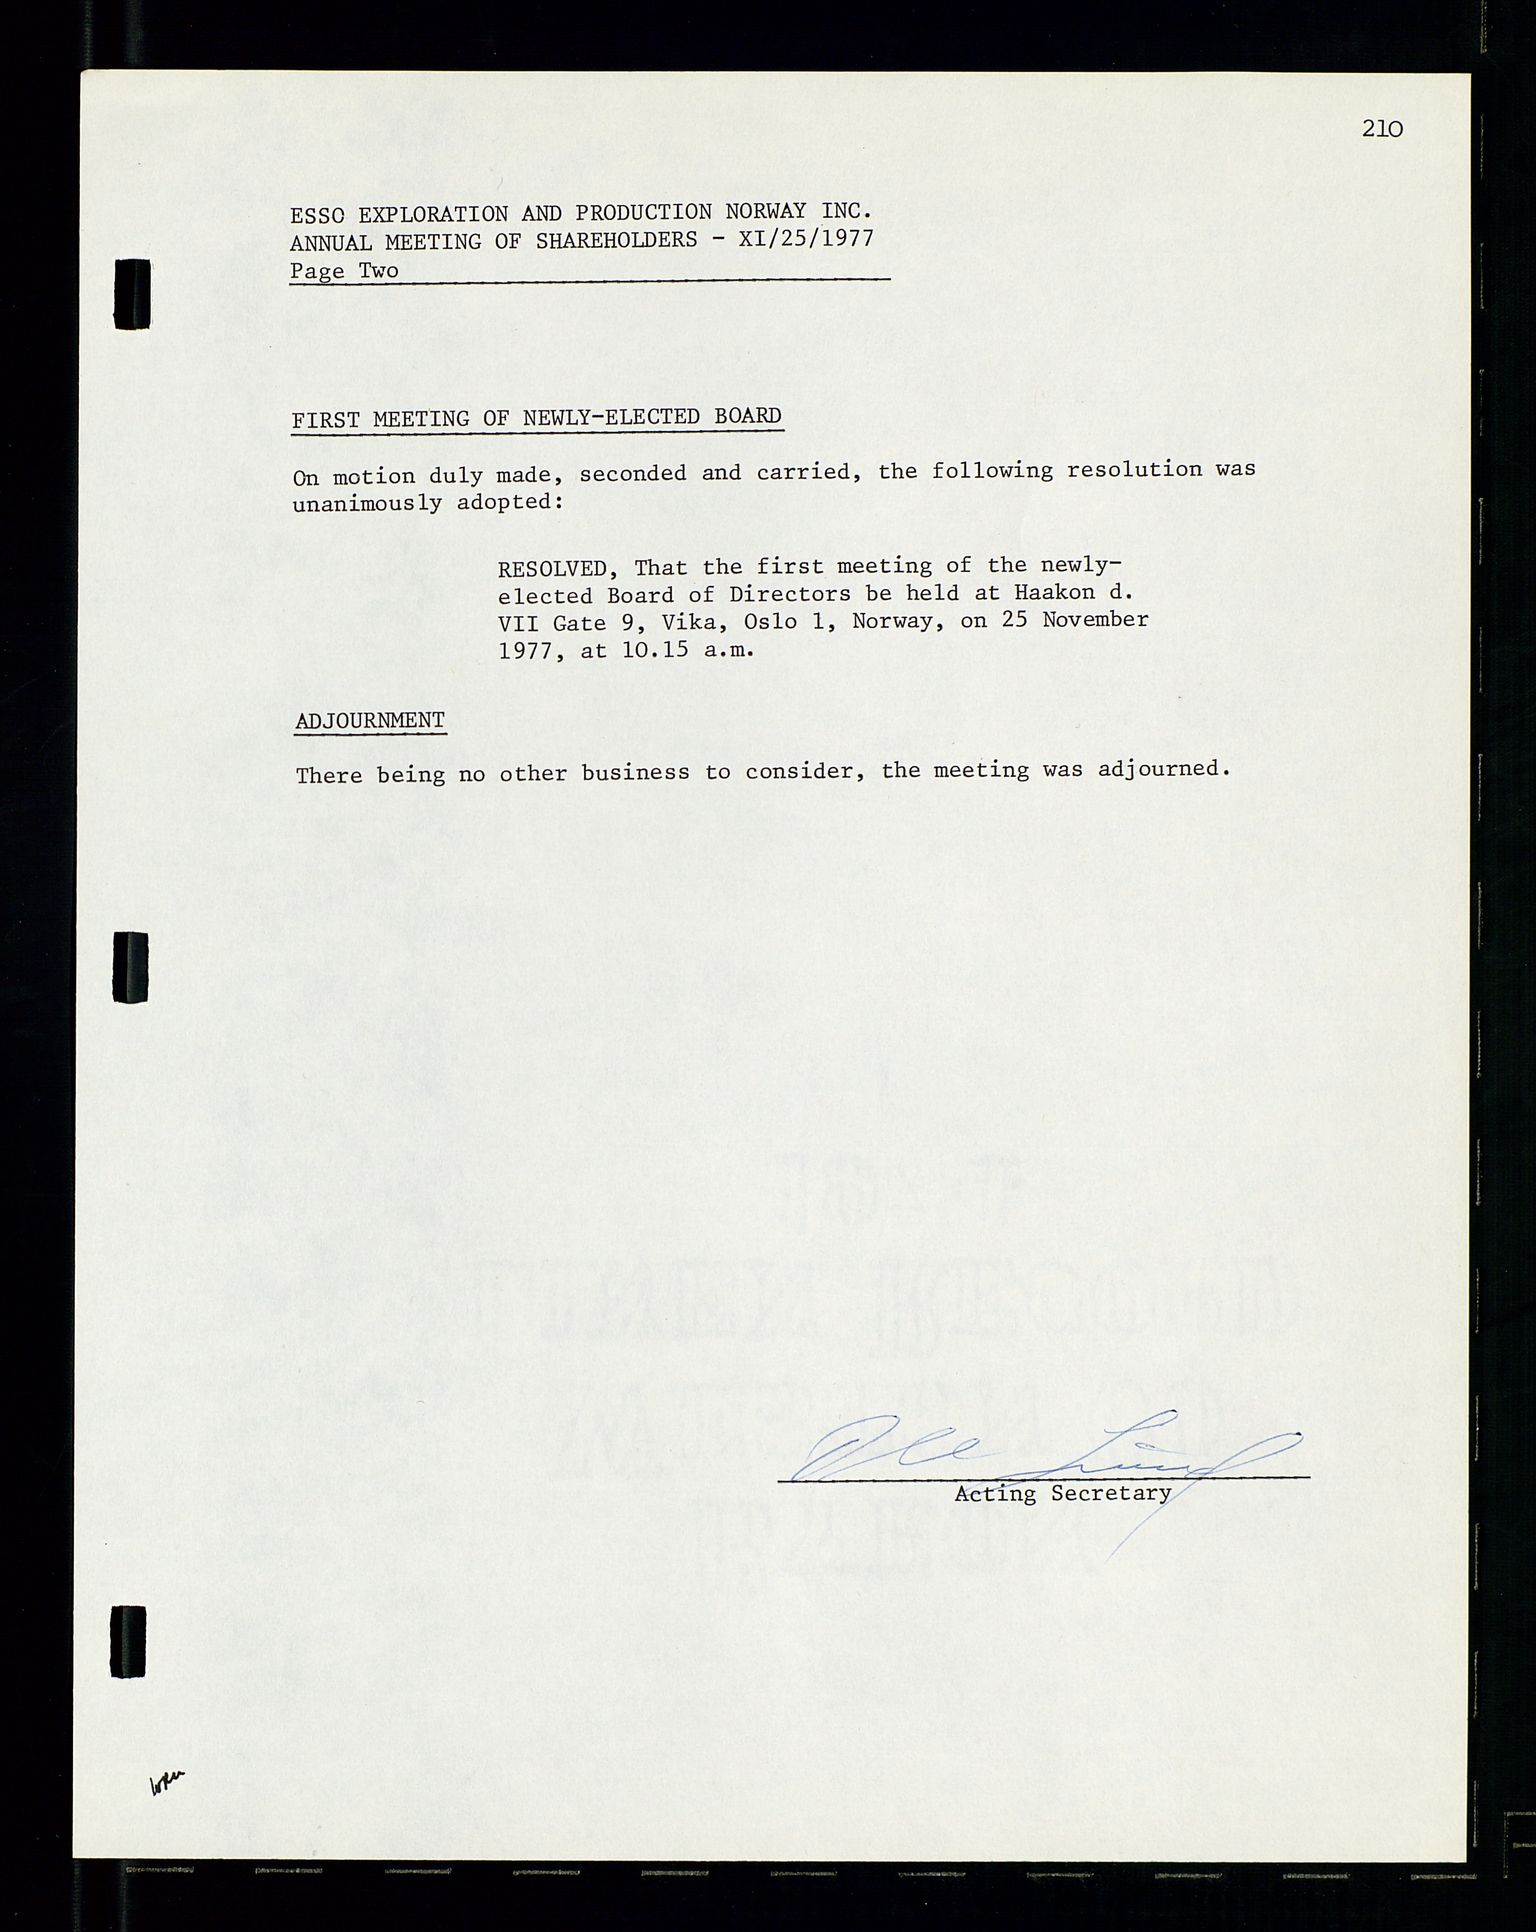 Pa 1512 - Esso Exploration and Production Norway Inc., SAST/A-101917/A/Aa/L0001/0002: Styredokumenter / Corporate records, Board meeting minutes, Agreements, Stocholder meetings, 1975-1979, p. 65